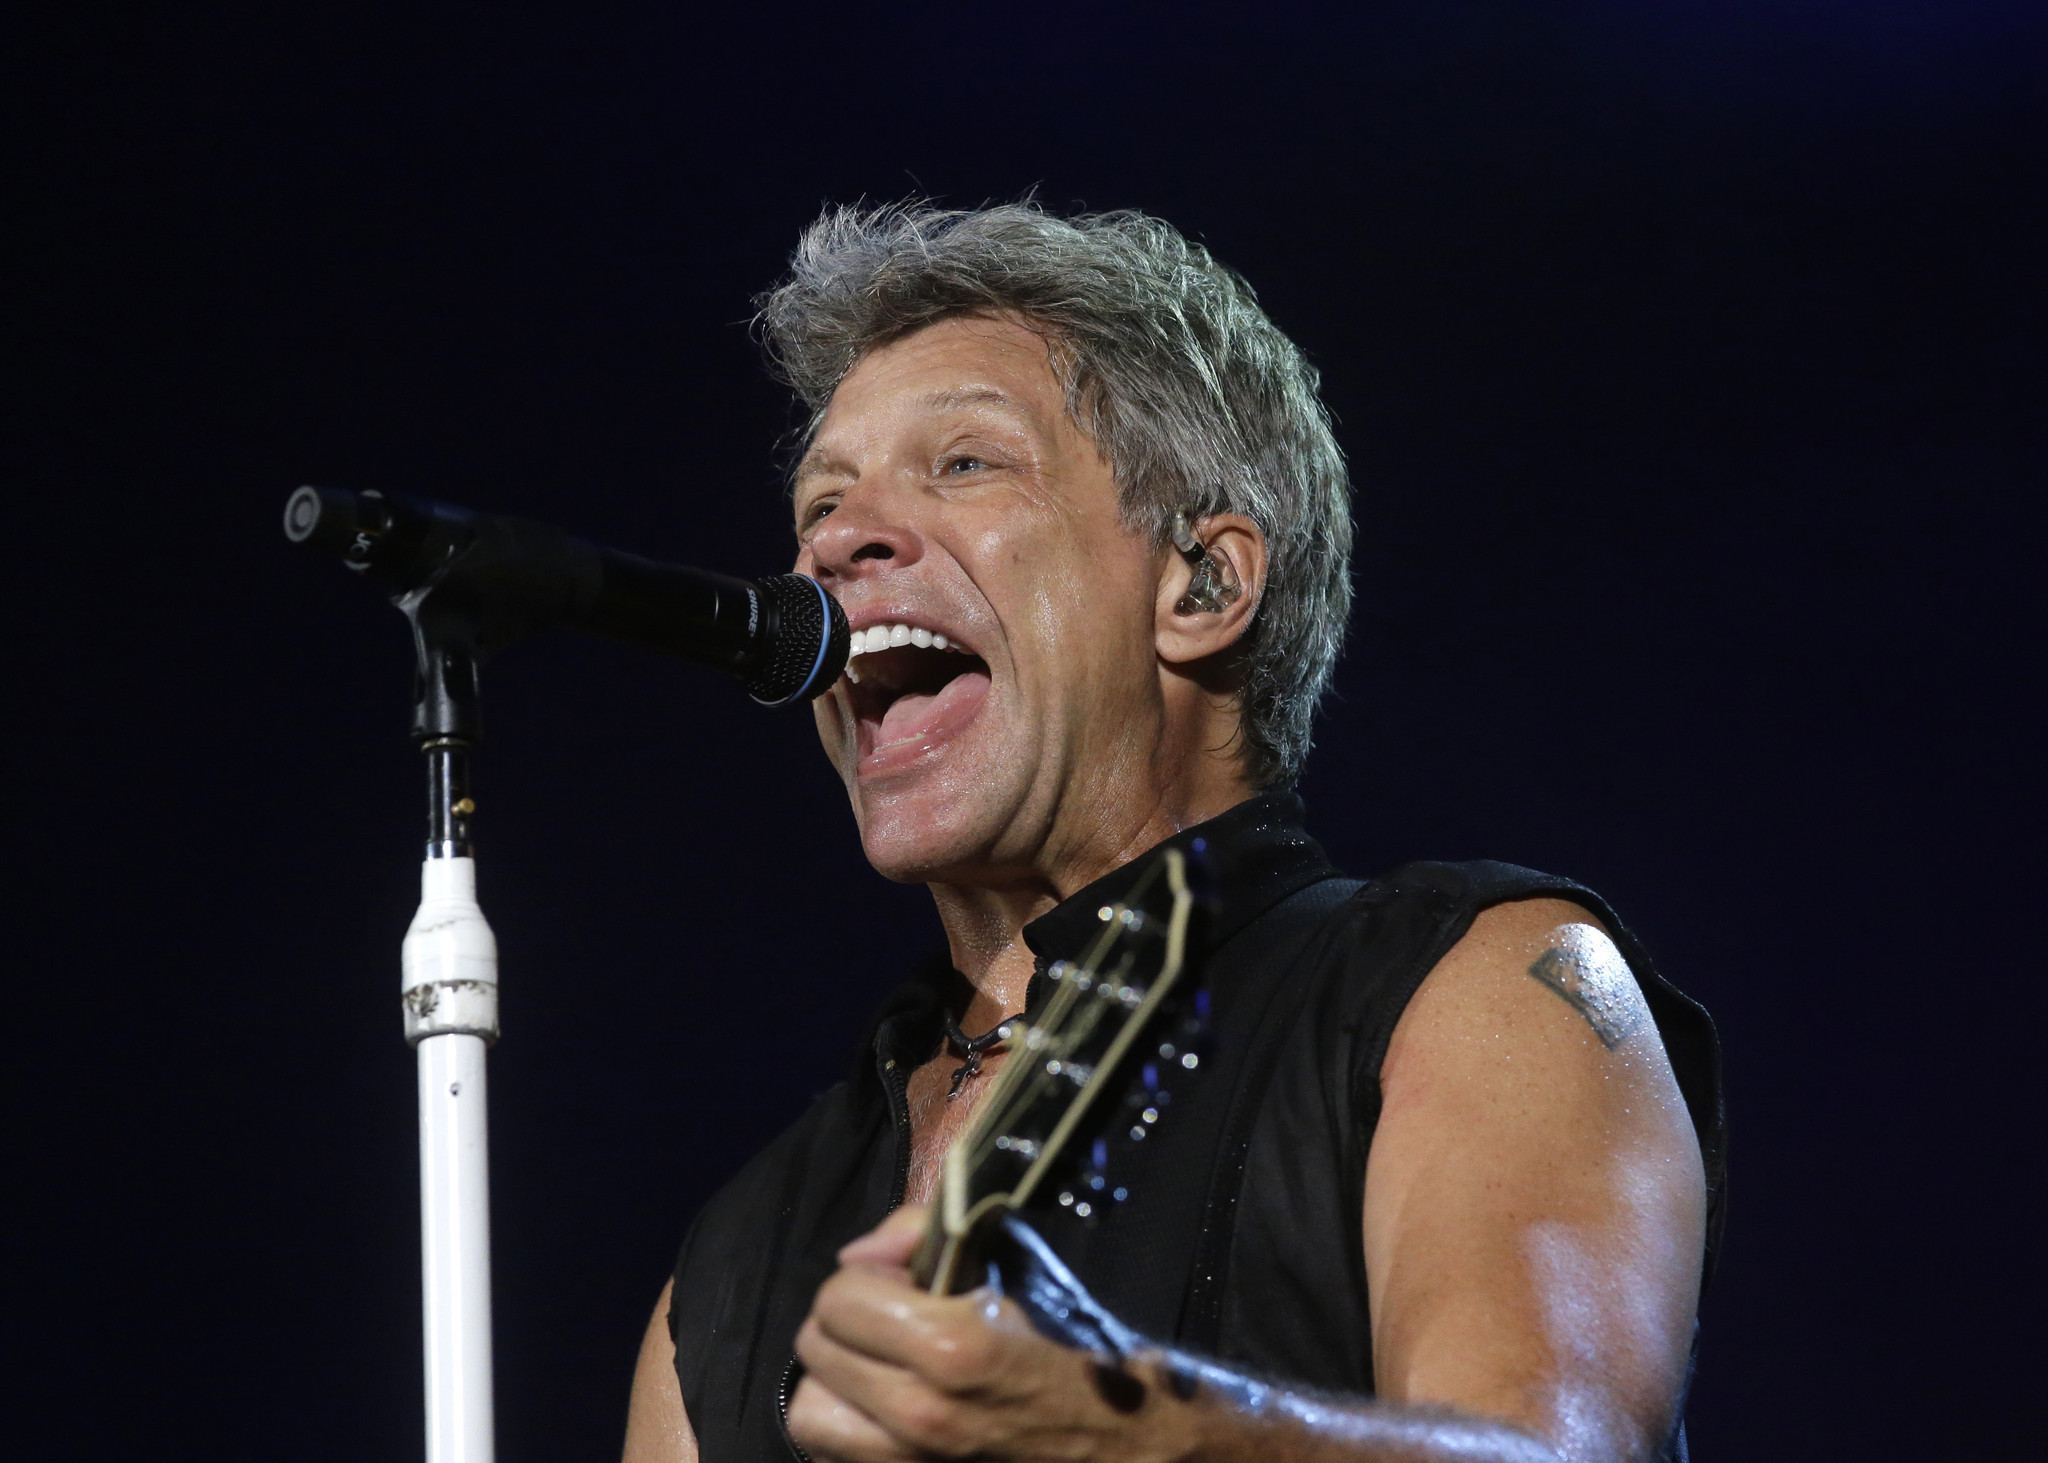 2048x1463 Jon Bon Jovi surprises cancer-stricken fan in New Jersey with guitar, kiss  - The Morning Call